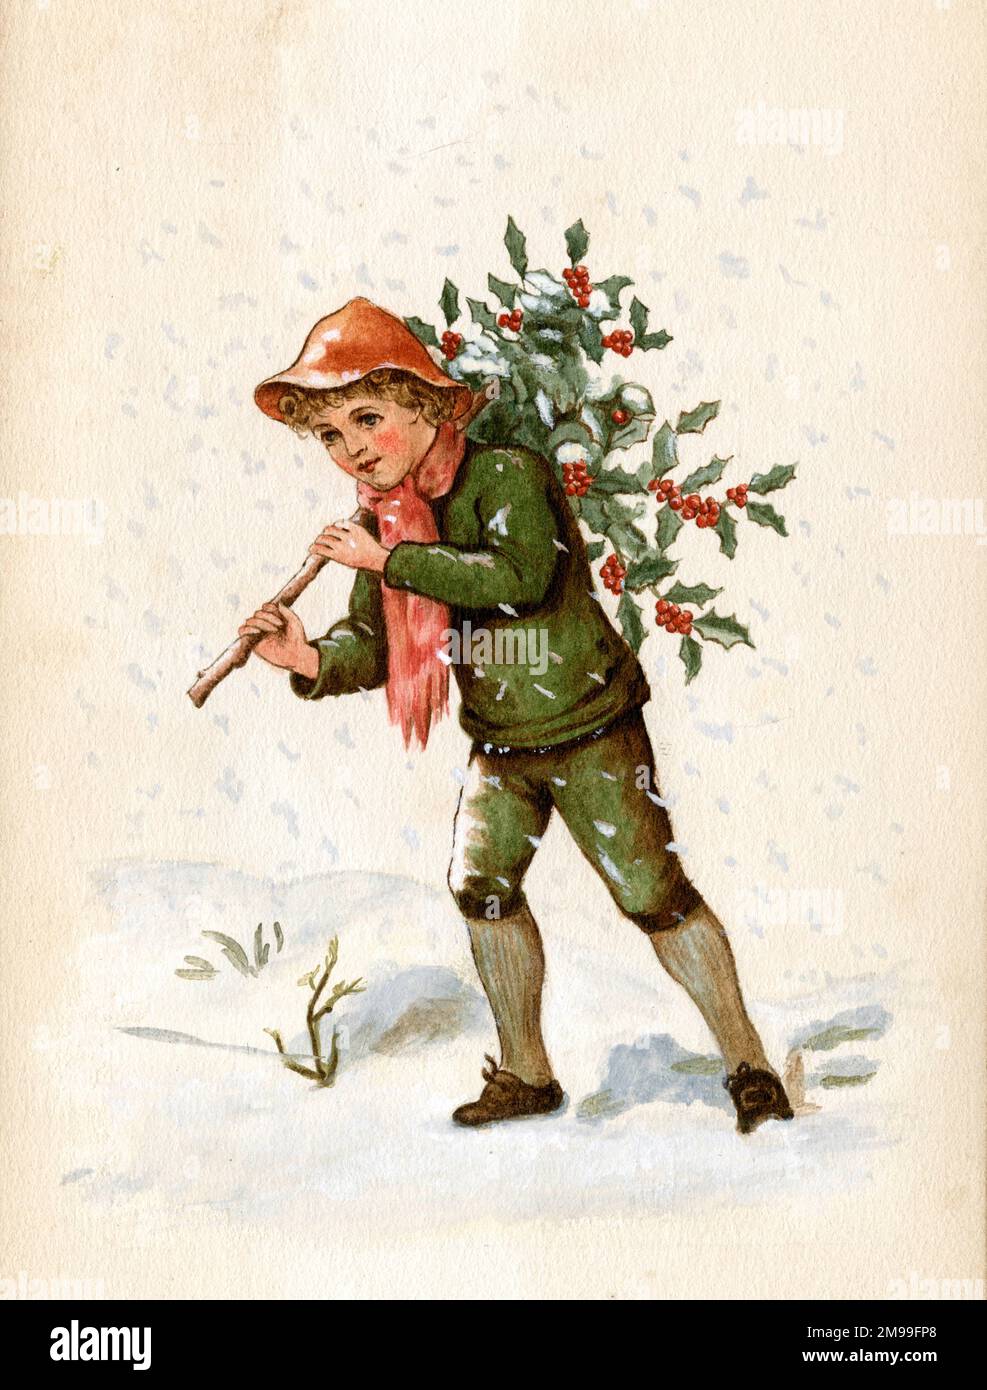 Artwork by Florence Auerbach, boy in the snow, carrying a branch of holly. Stock Photo